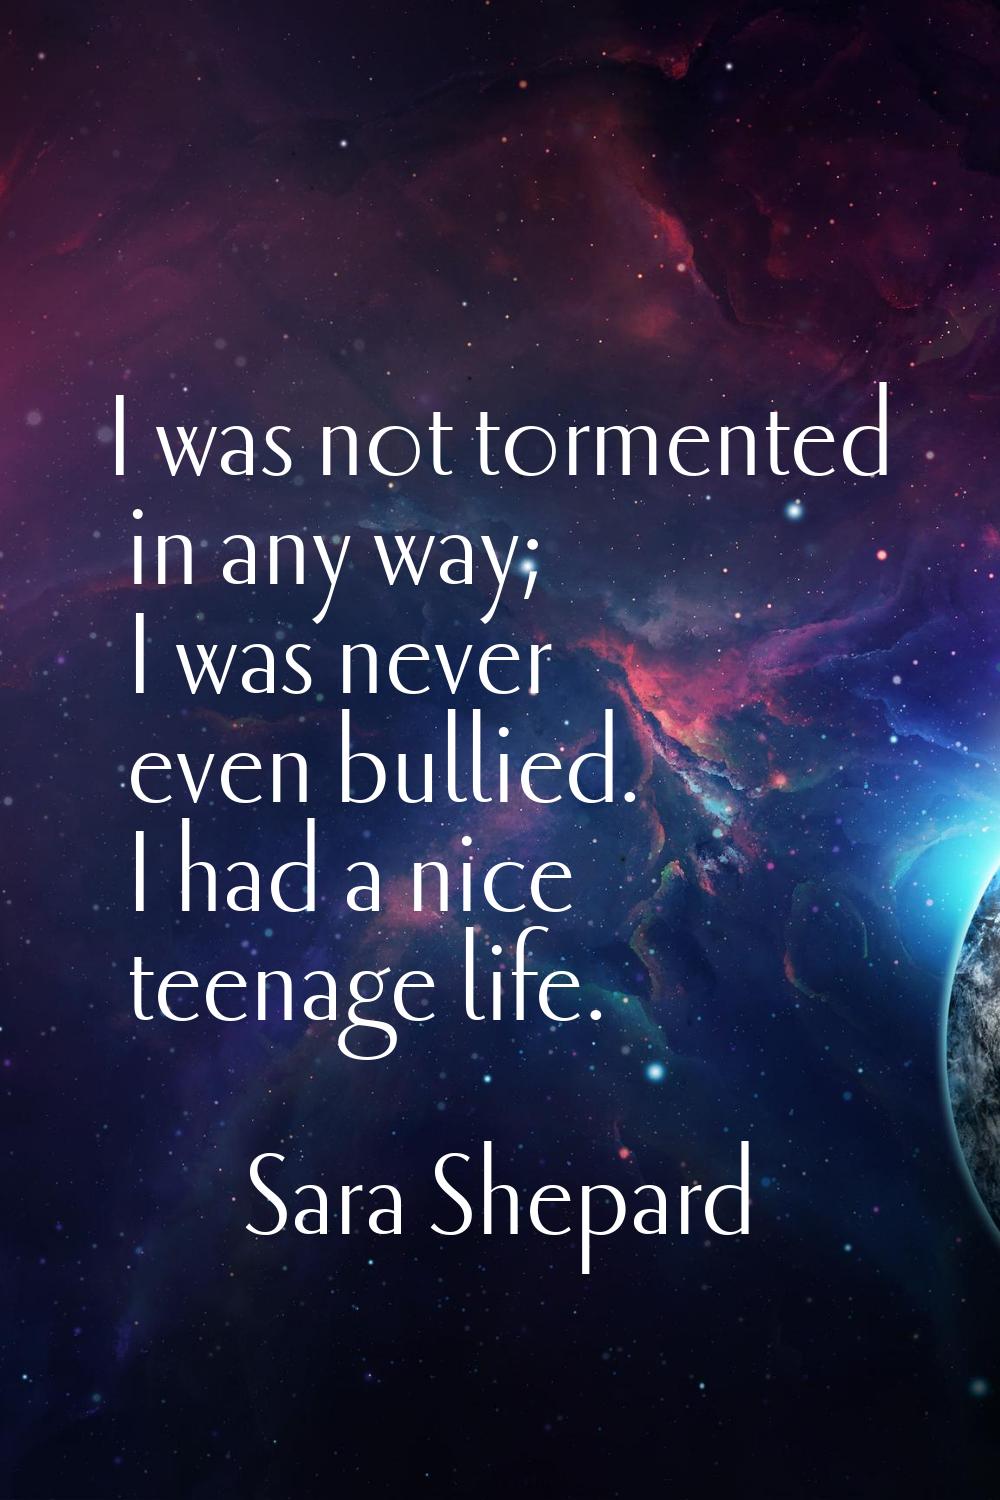 I was not tormented in any way; I was never even bullied. I had a nice teenage life.